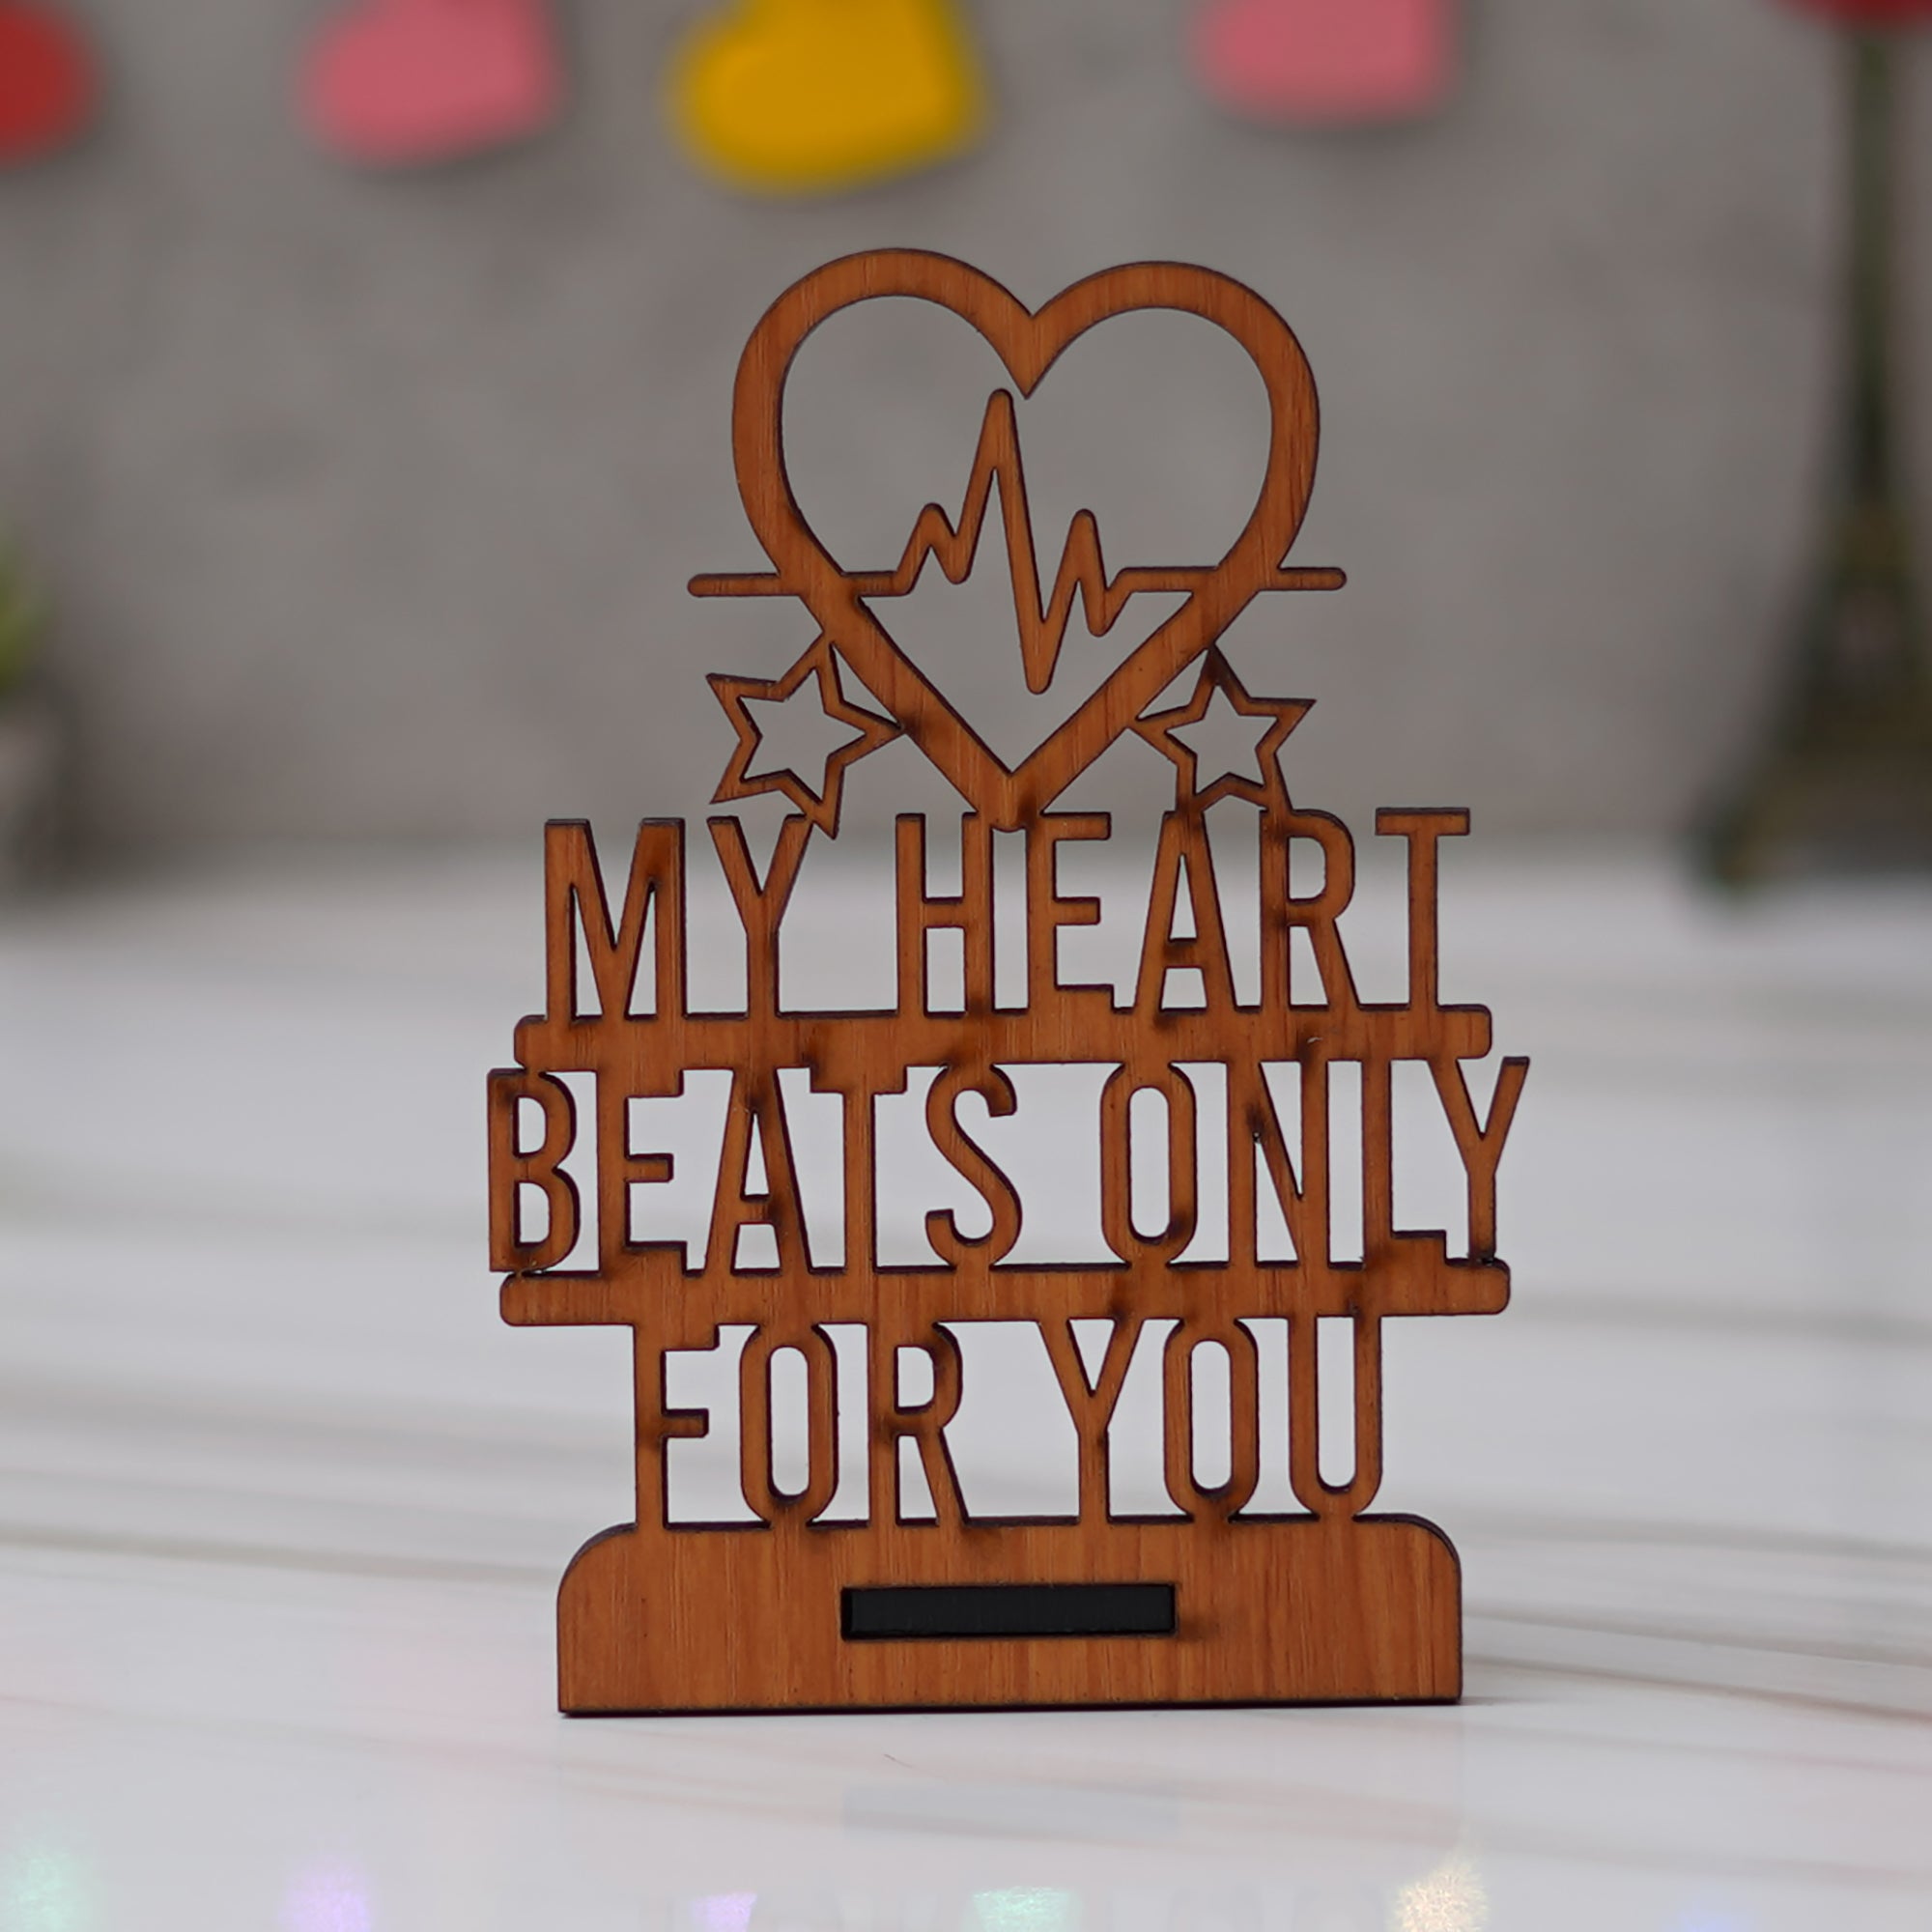 Valentine Combo of Golden Rose Gift Set, "My Heart Beats Only For You" Wooden Showpiece With Stand, Bride Kissing Groom Romantic Polyresin Decorative Showpiece 3